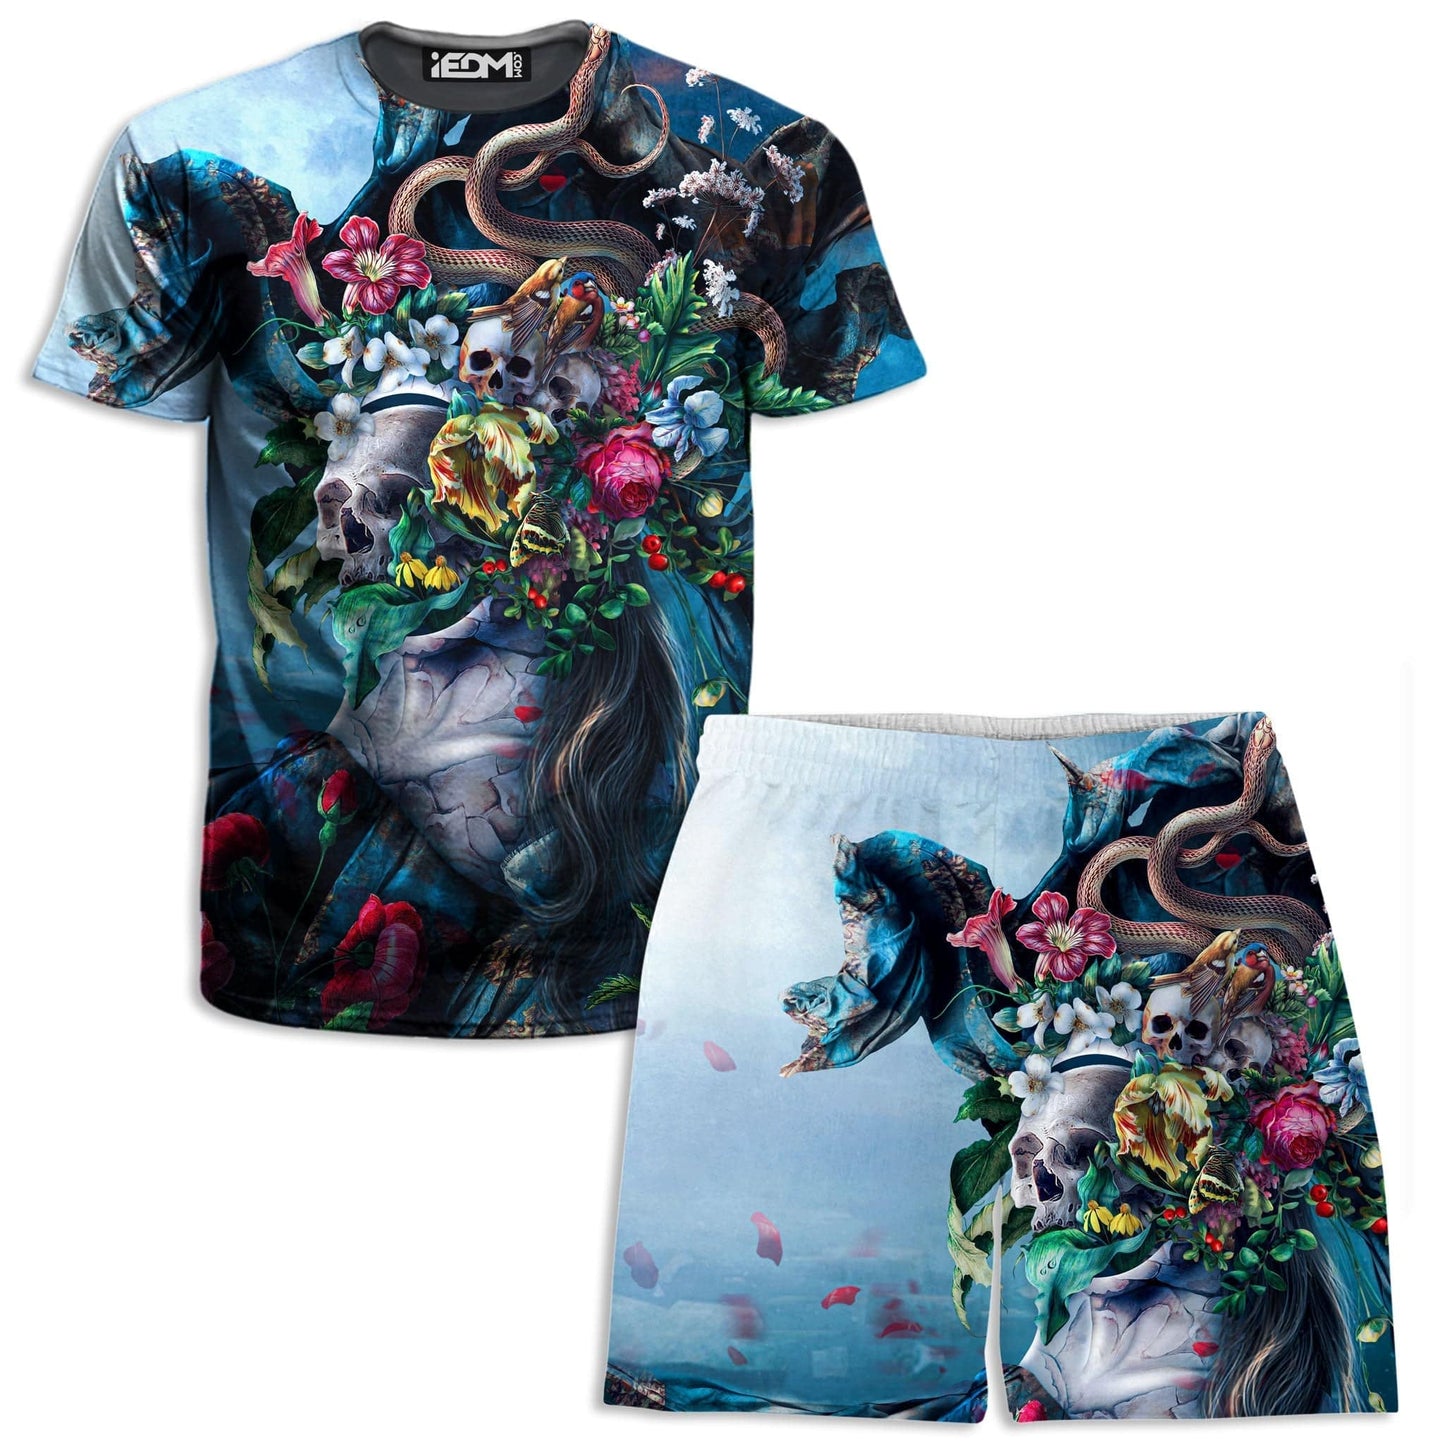 Live and Die T-Shirt and Shorts Combo, Riza Peker, | iEDM